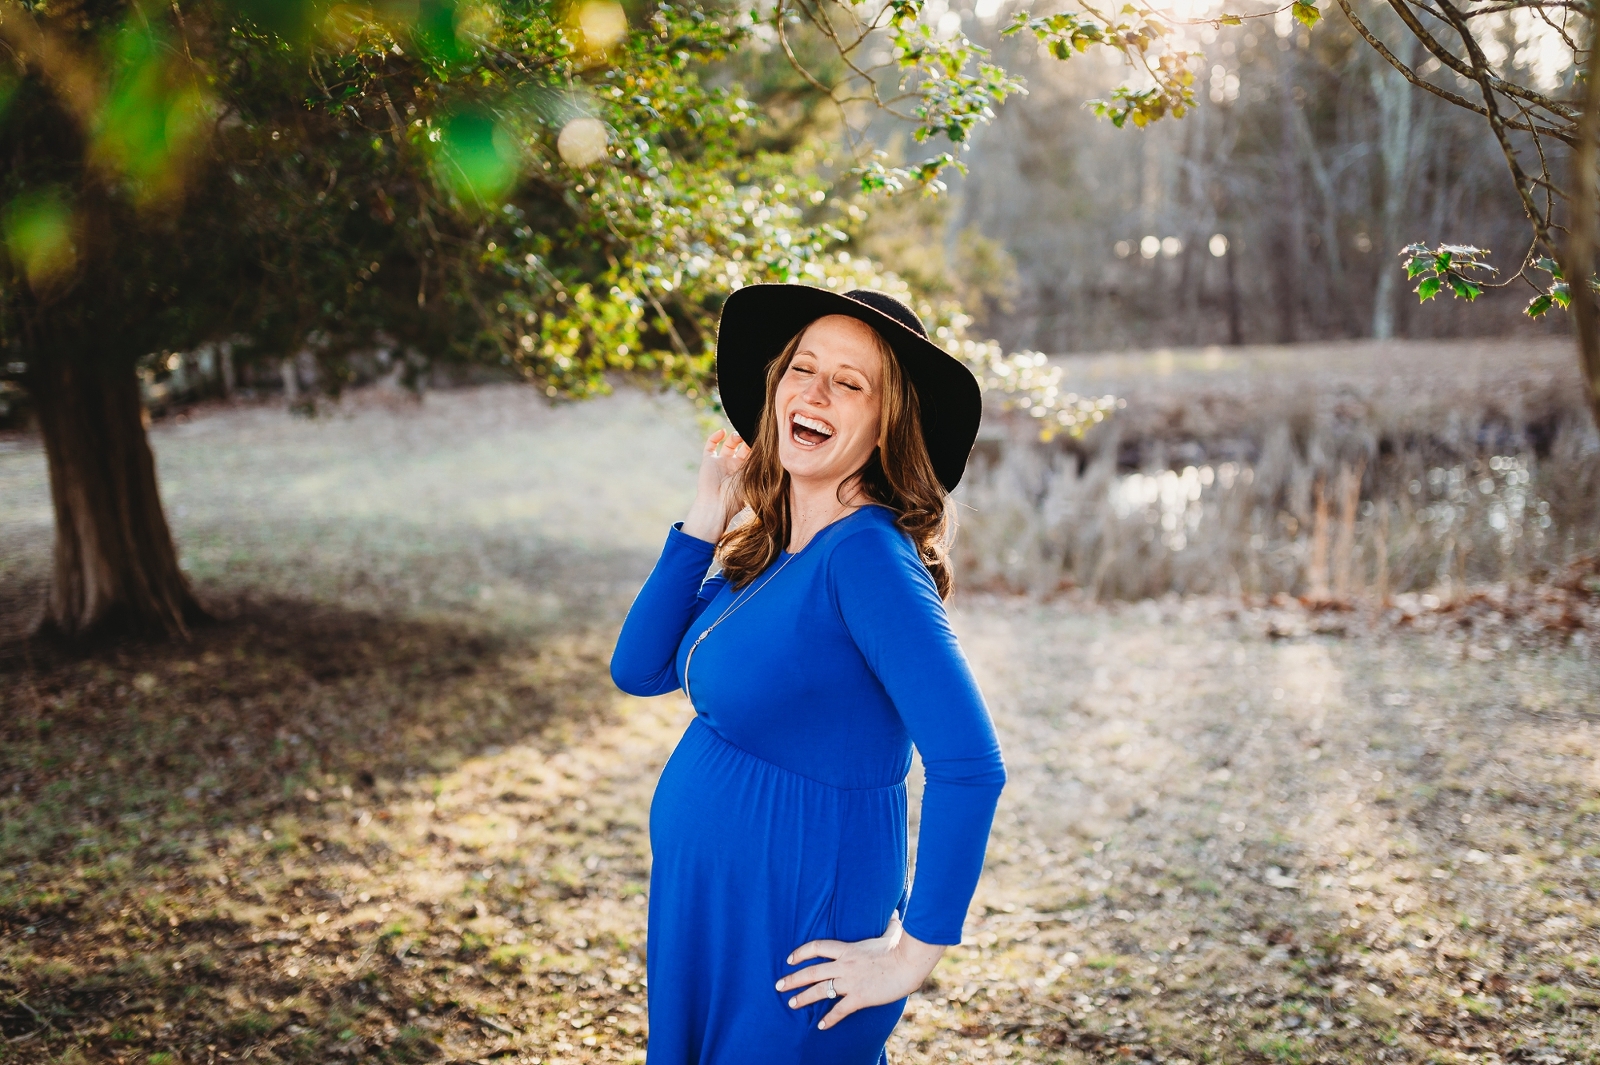 Melissa radiates glowing beauty and happiness at her New Jersey golden hour maternity session.